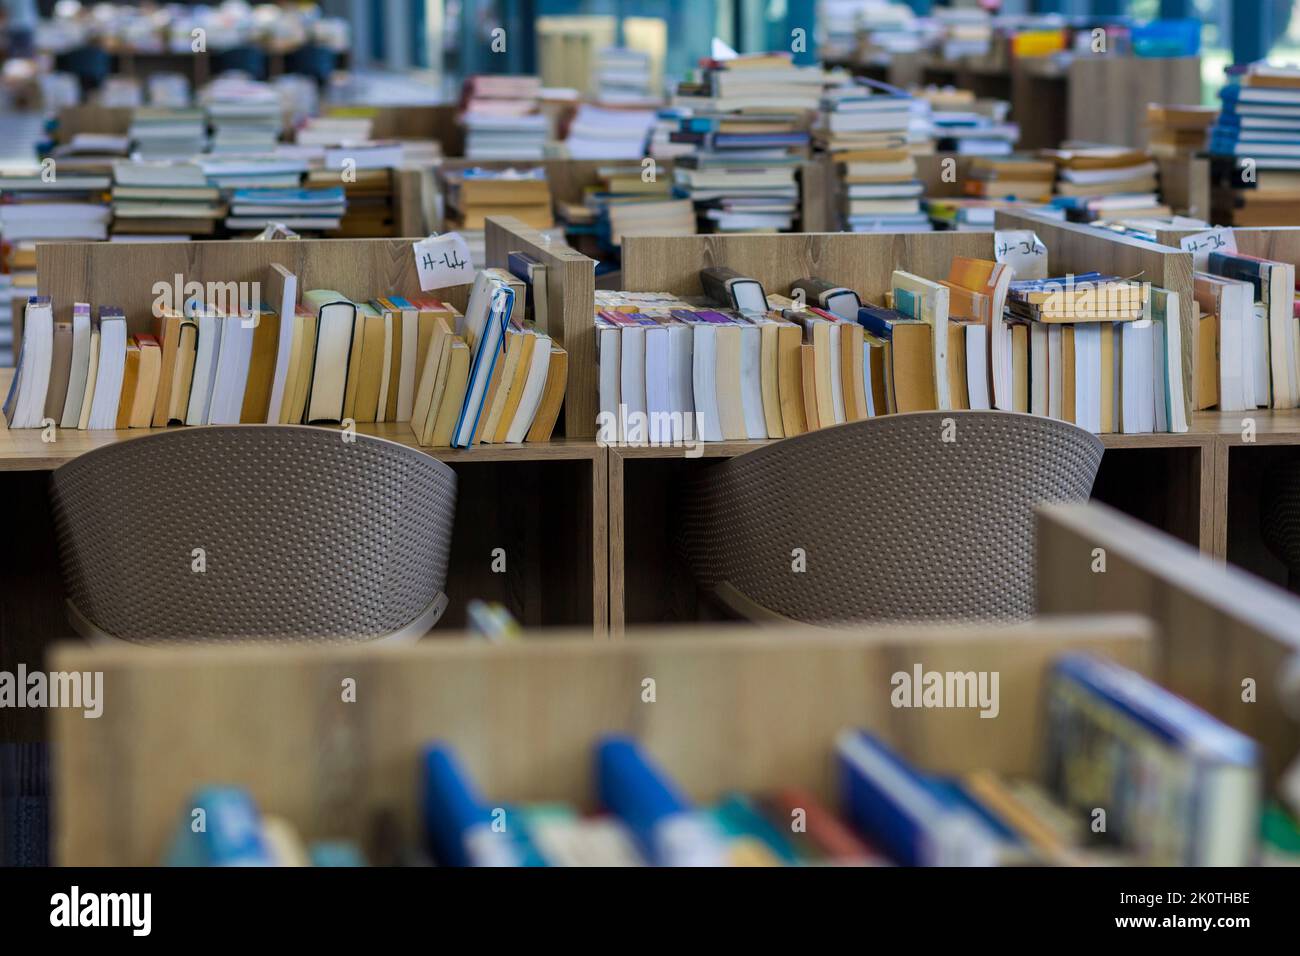 Books in a pile on top of each other Stock Photo